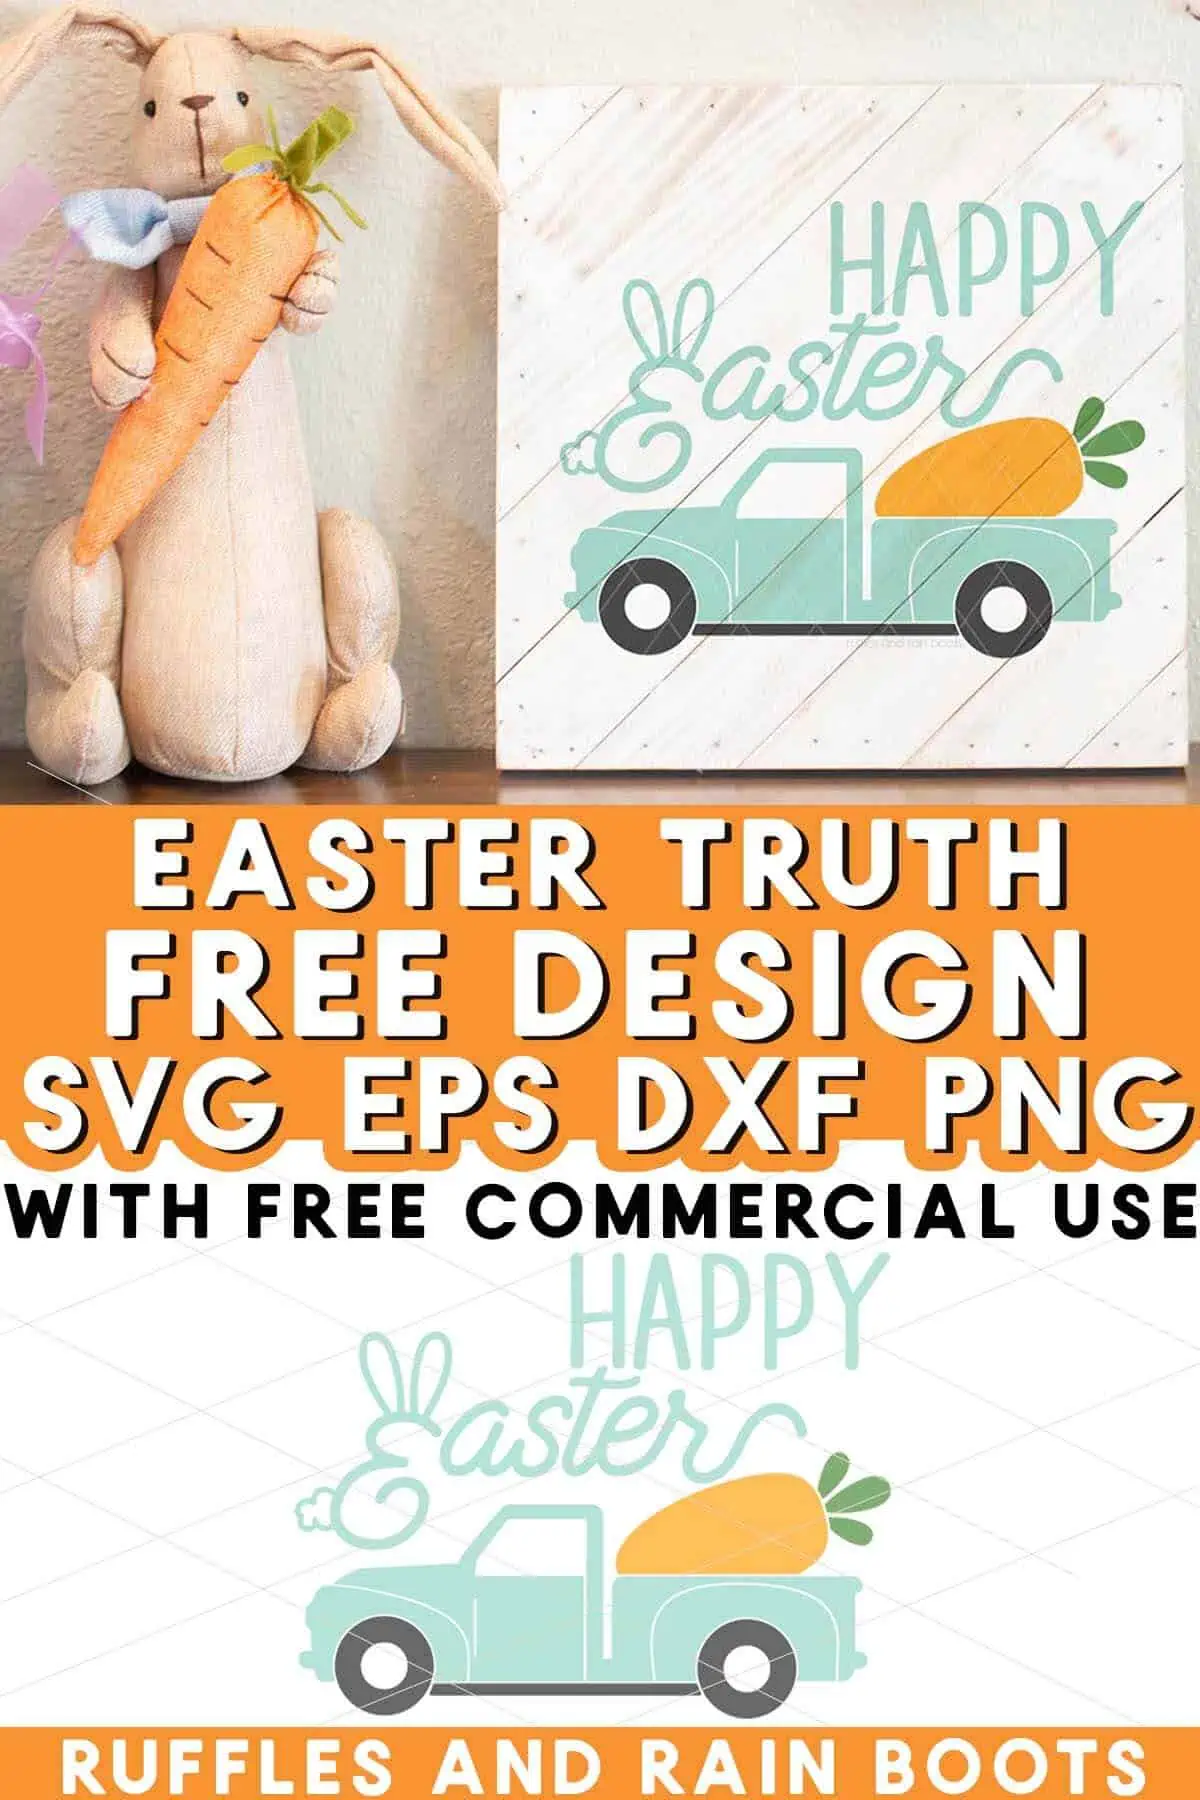 Split vertical image showing a bunny and Easter sign with Happy Easter SVG with truck and carrot.